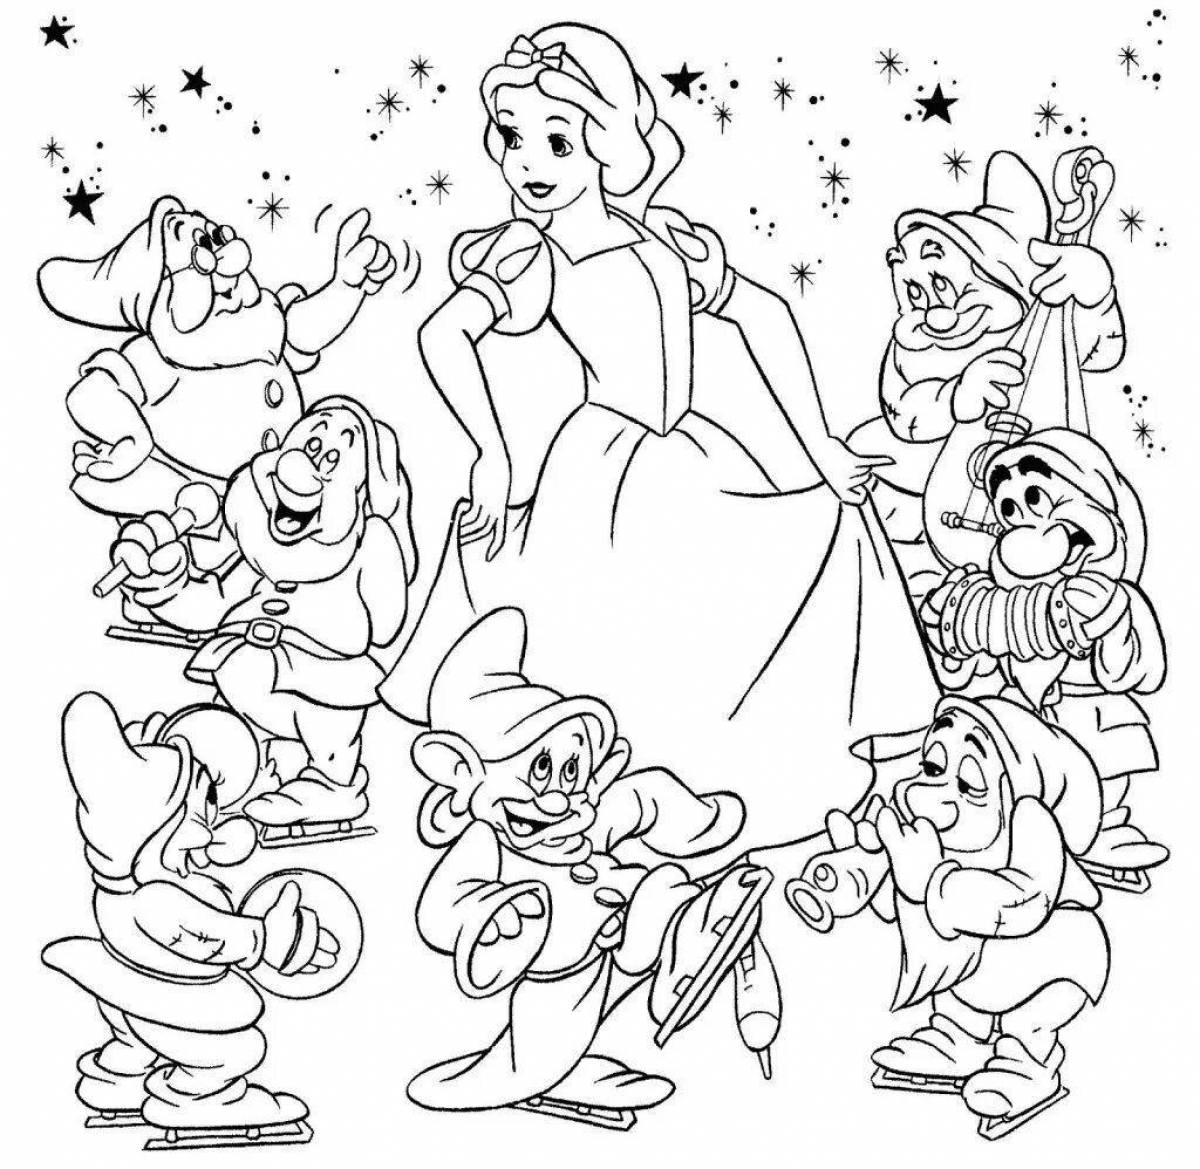 Animated disney coloring book for kids